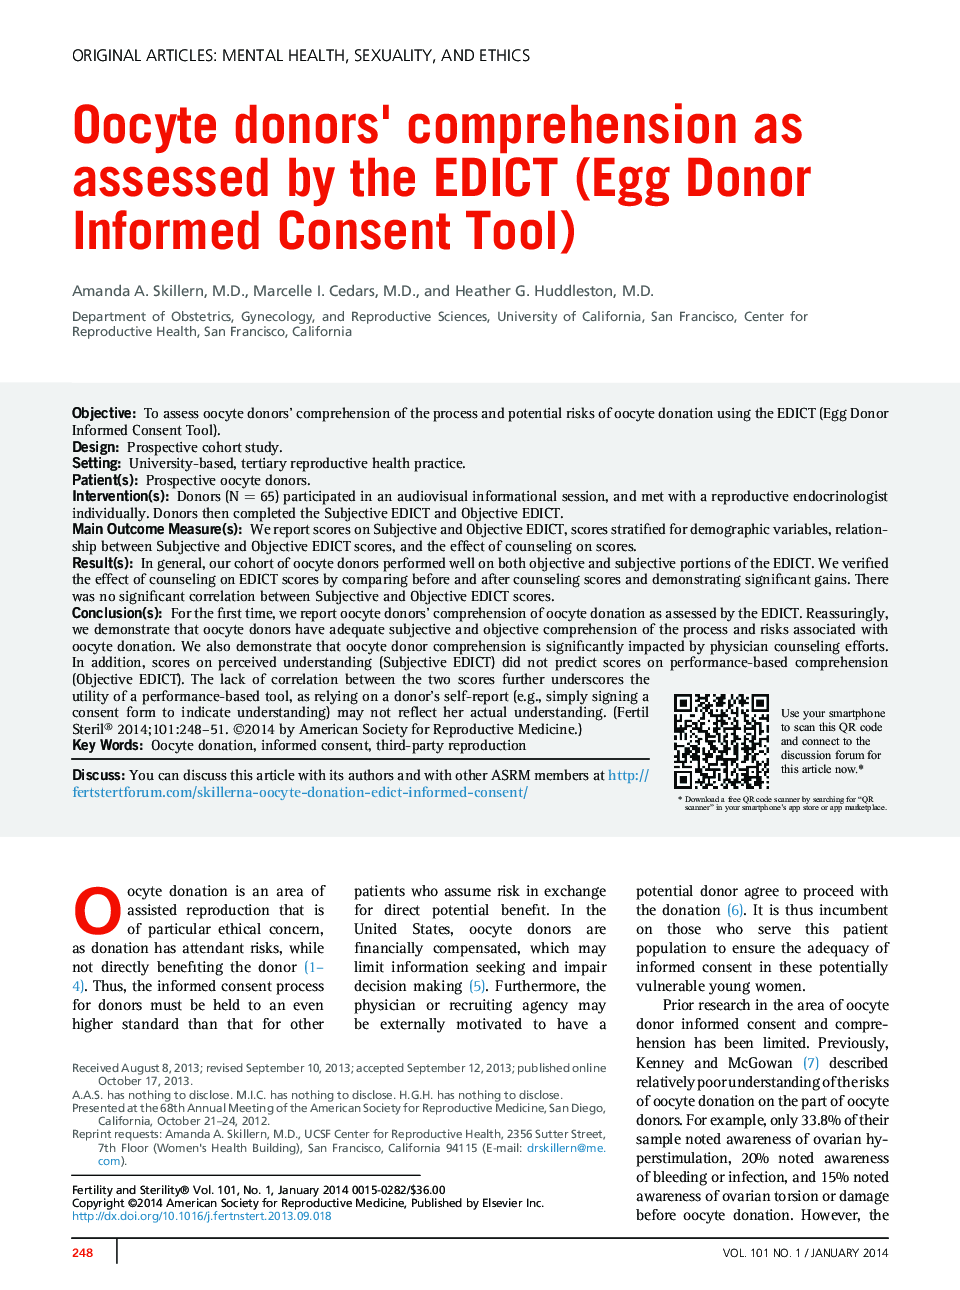 Oocyte donors' comprehension as assessed by the EDICT (Egg Donor Informed Consent Tool) 